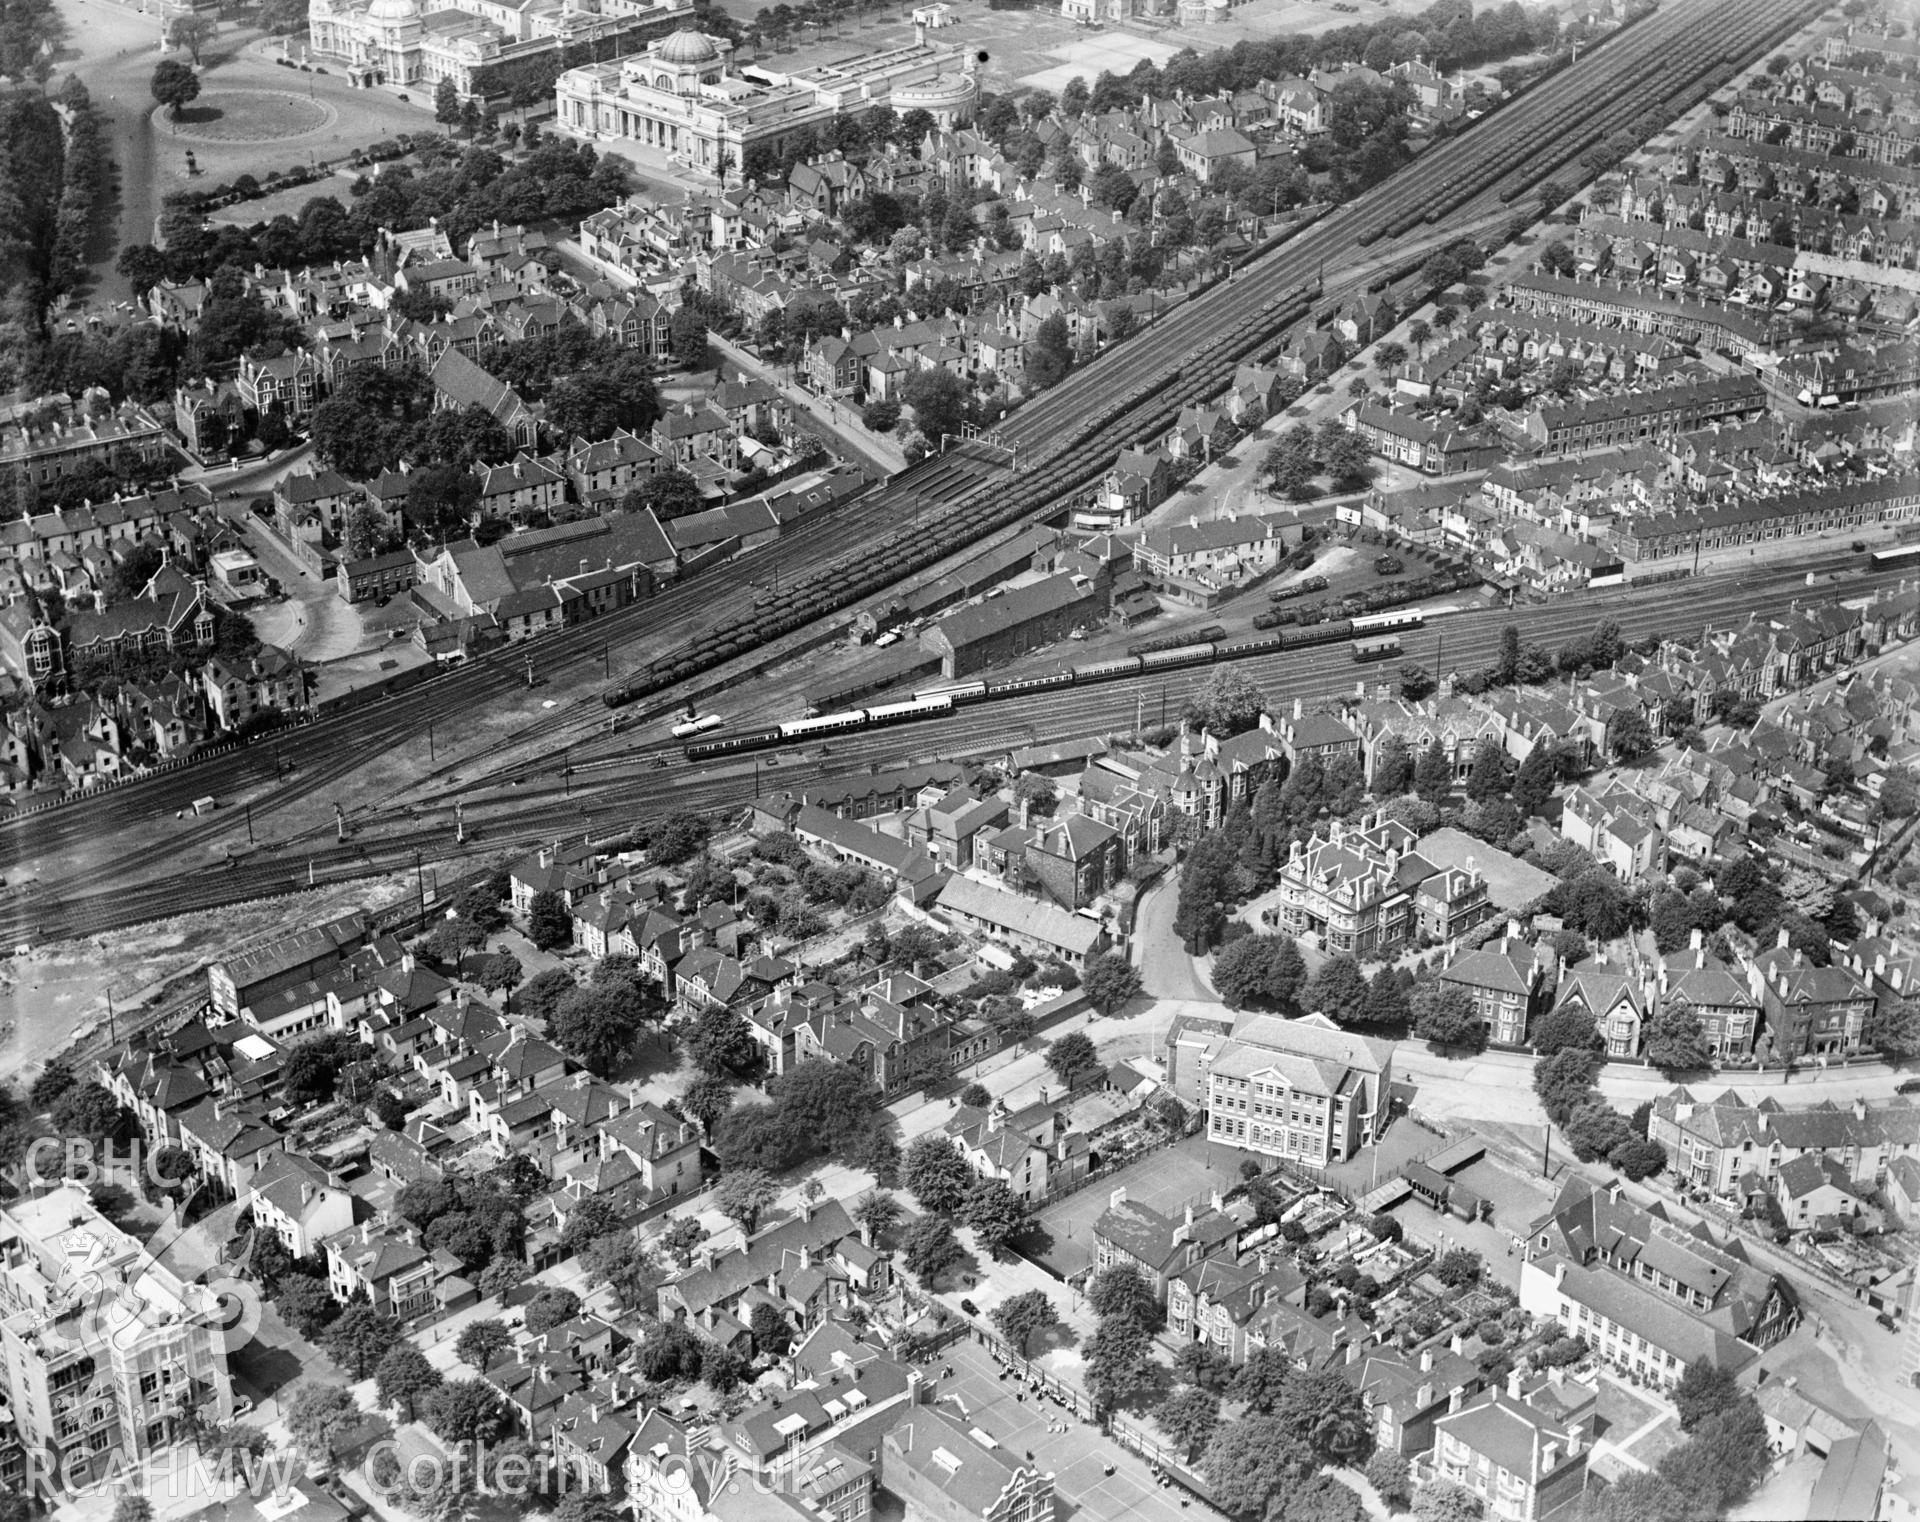 View of central Cardiff, showing Heathfield House catholic school, Mansion House and the Prince of Wales hospital, oblique aerial view. 5?x4? black and white glass plate negative.